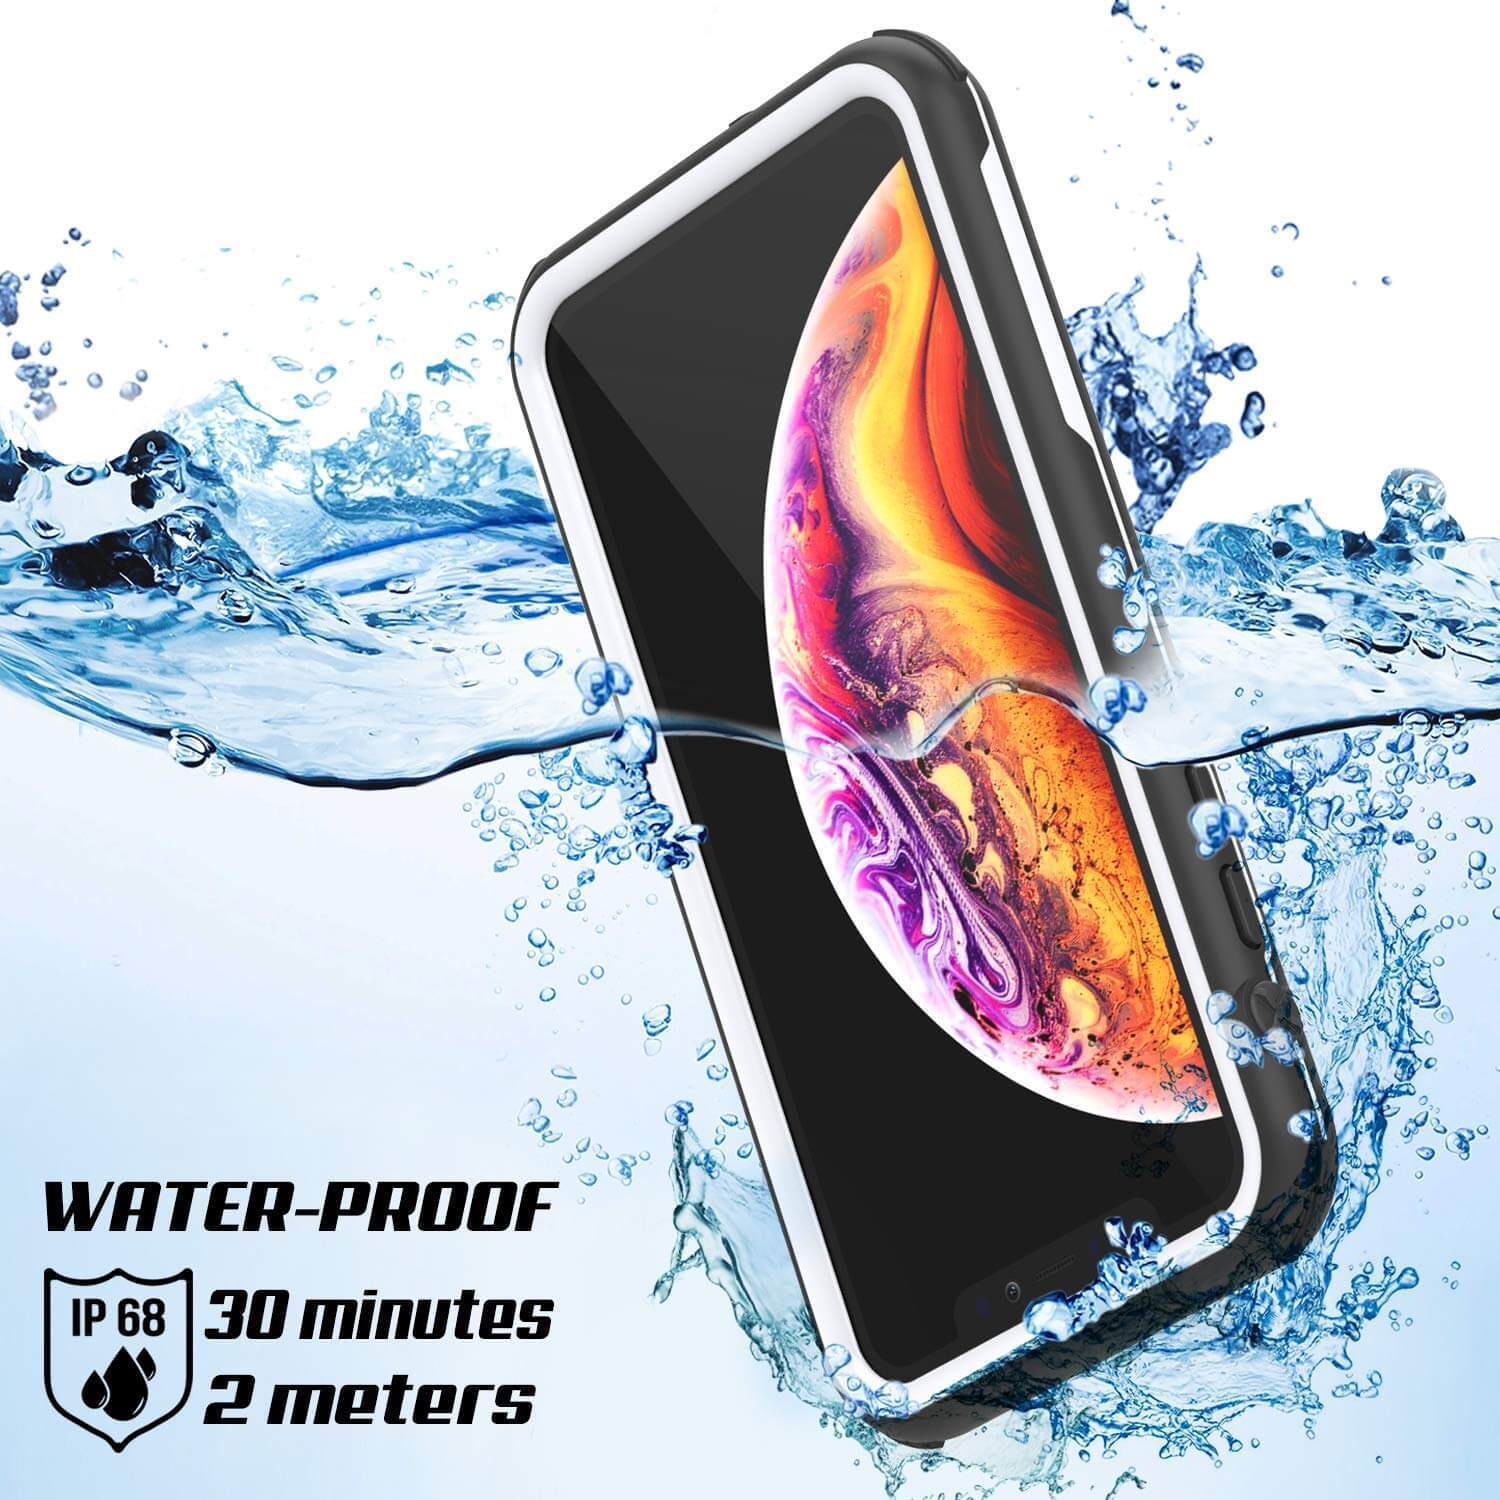 iPhone XS Max Waterproof IP68 Case, Punkcase [white] [Rapture Series]  W/Built in Screen Protector